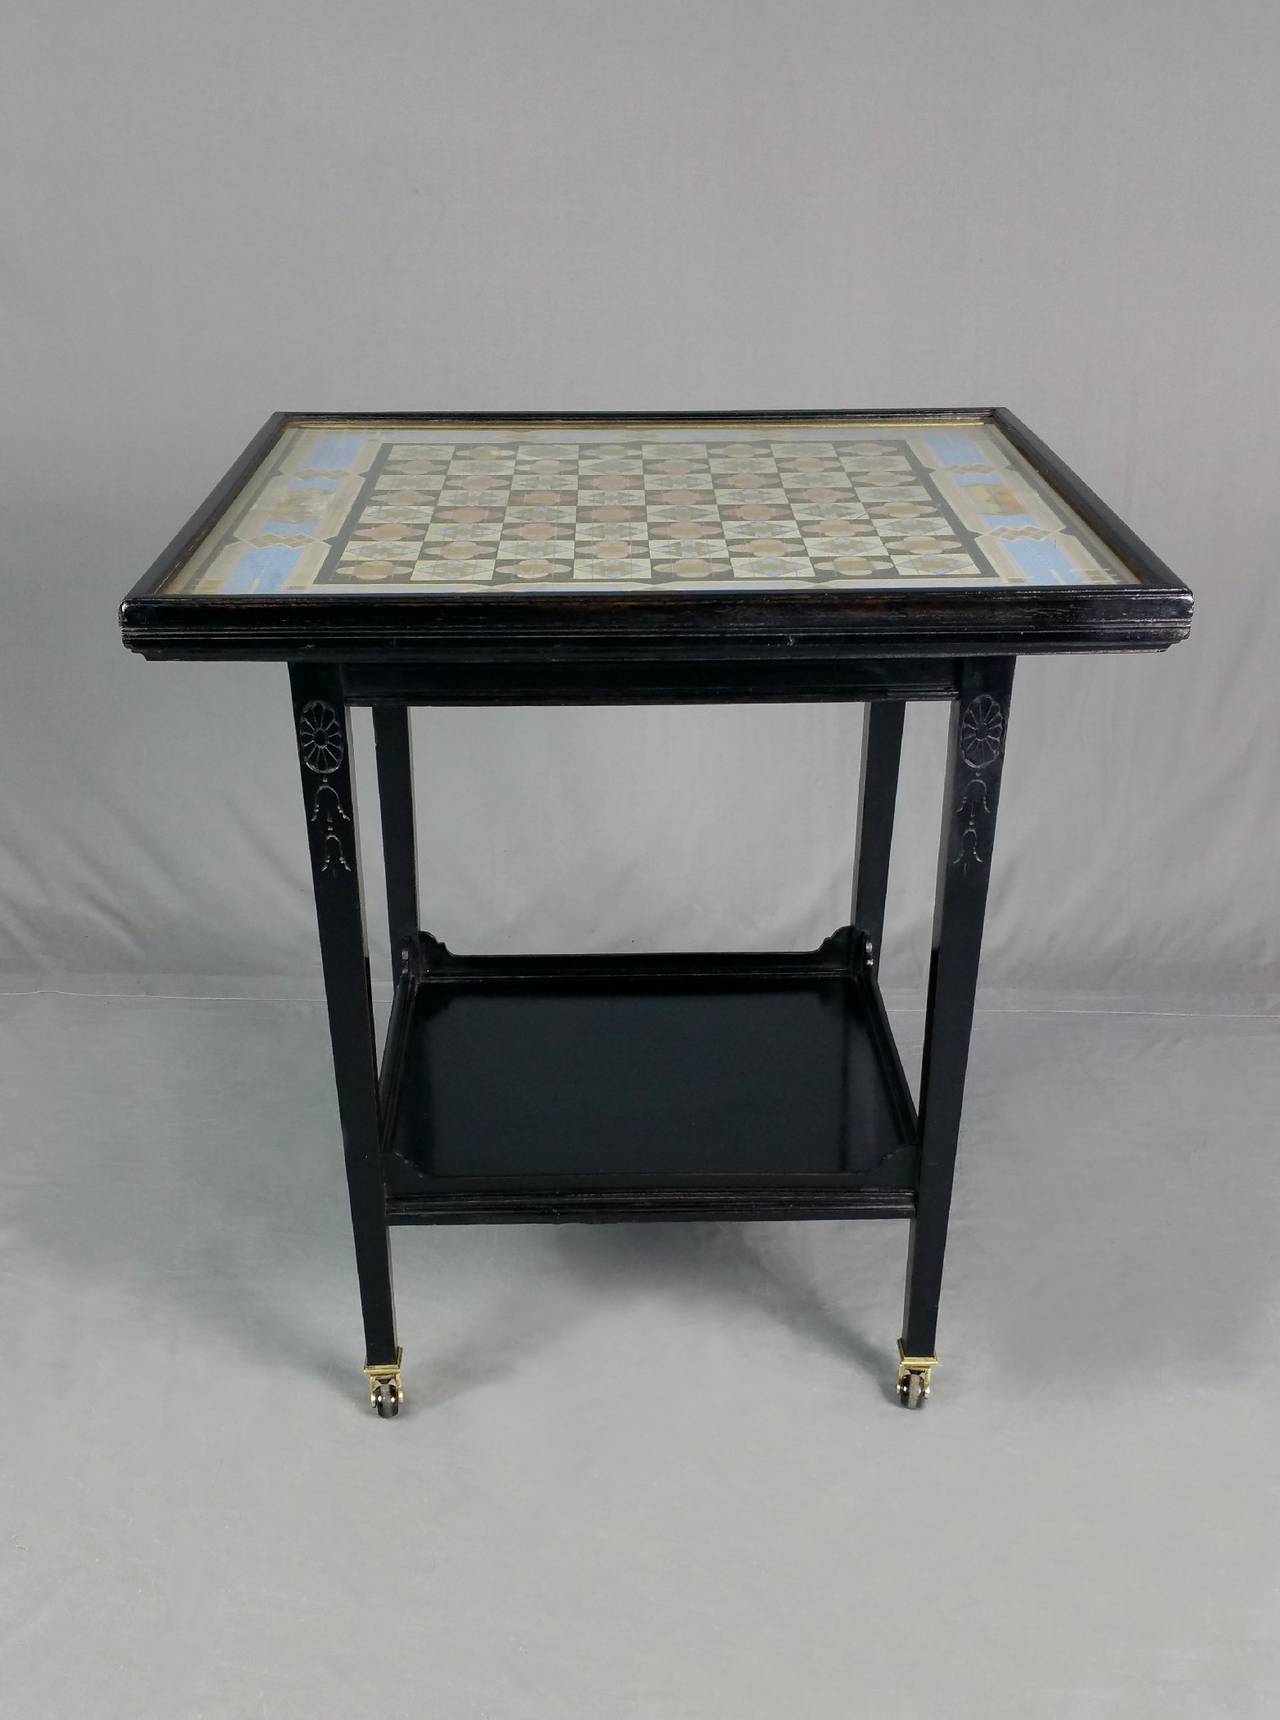 This rare and unusual Victorian two-tiered chess table has an ebonized finish with an outstanding and delicately detailed design. The table stands on square tapered legs, finished with brass mounts and ceramic castors. The top measures 24 ½ in –